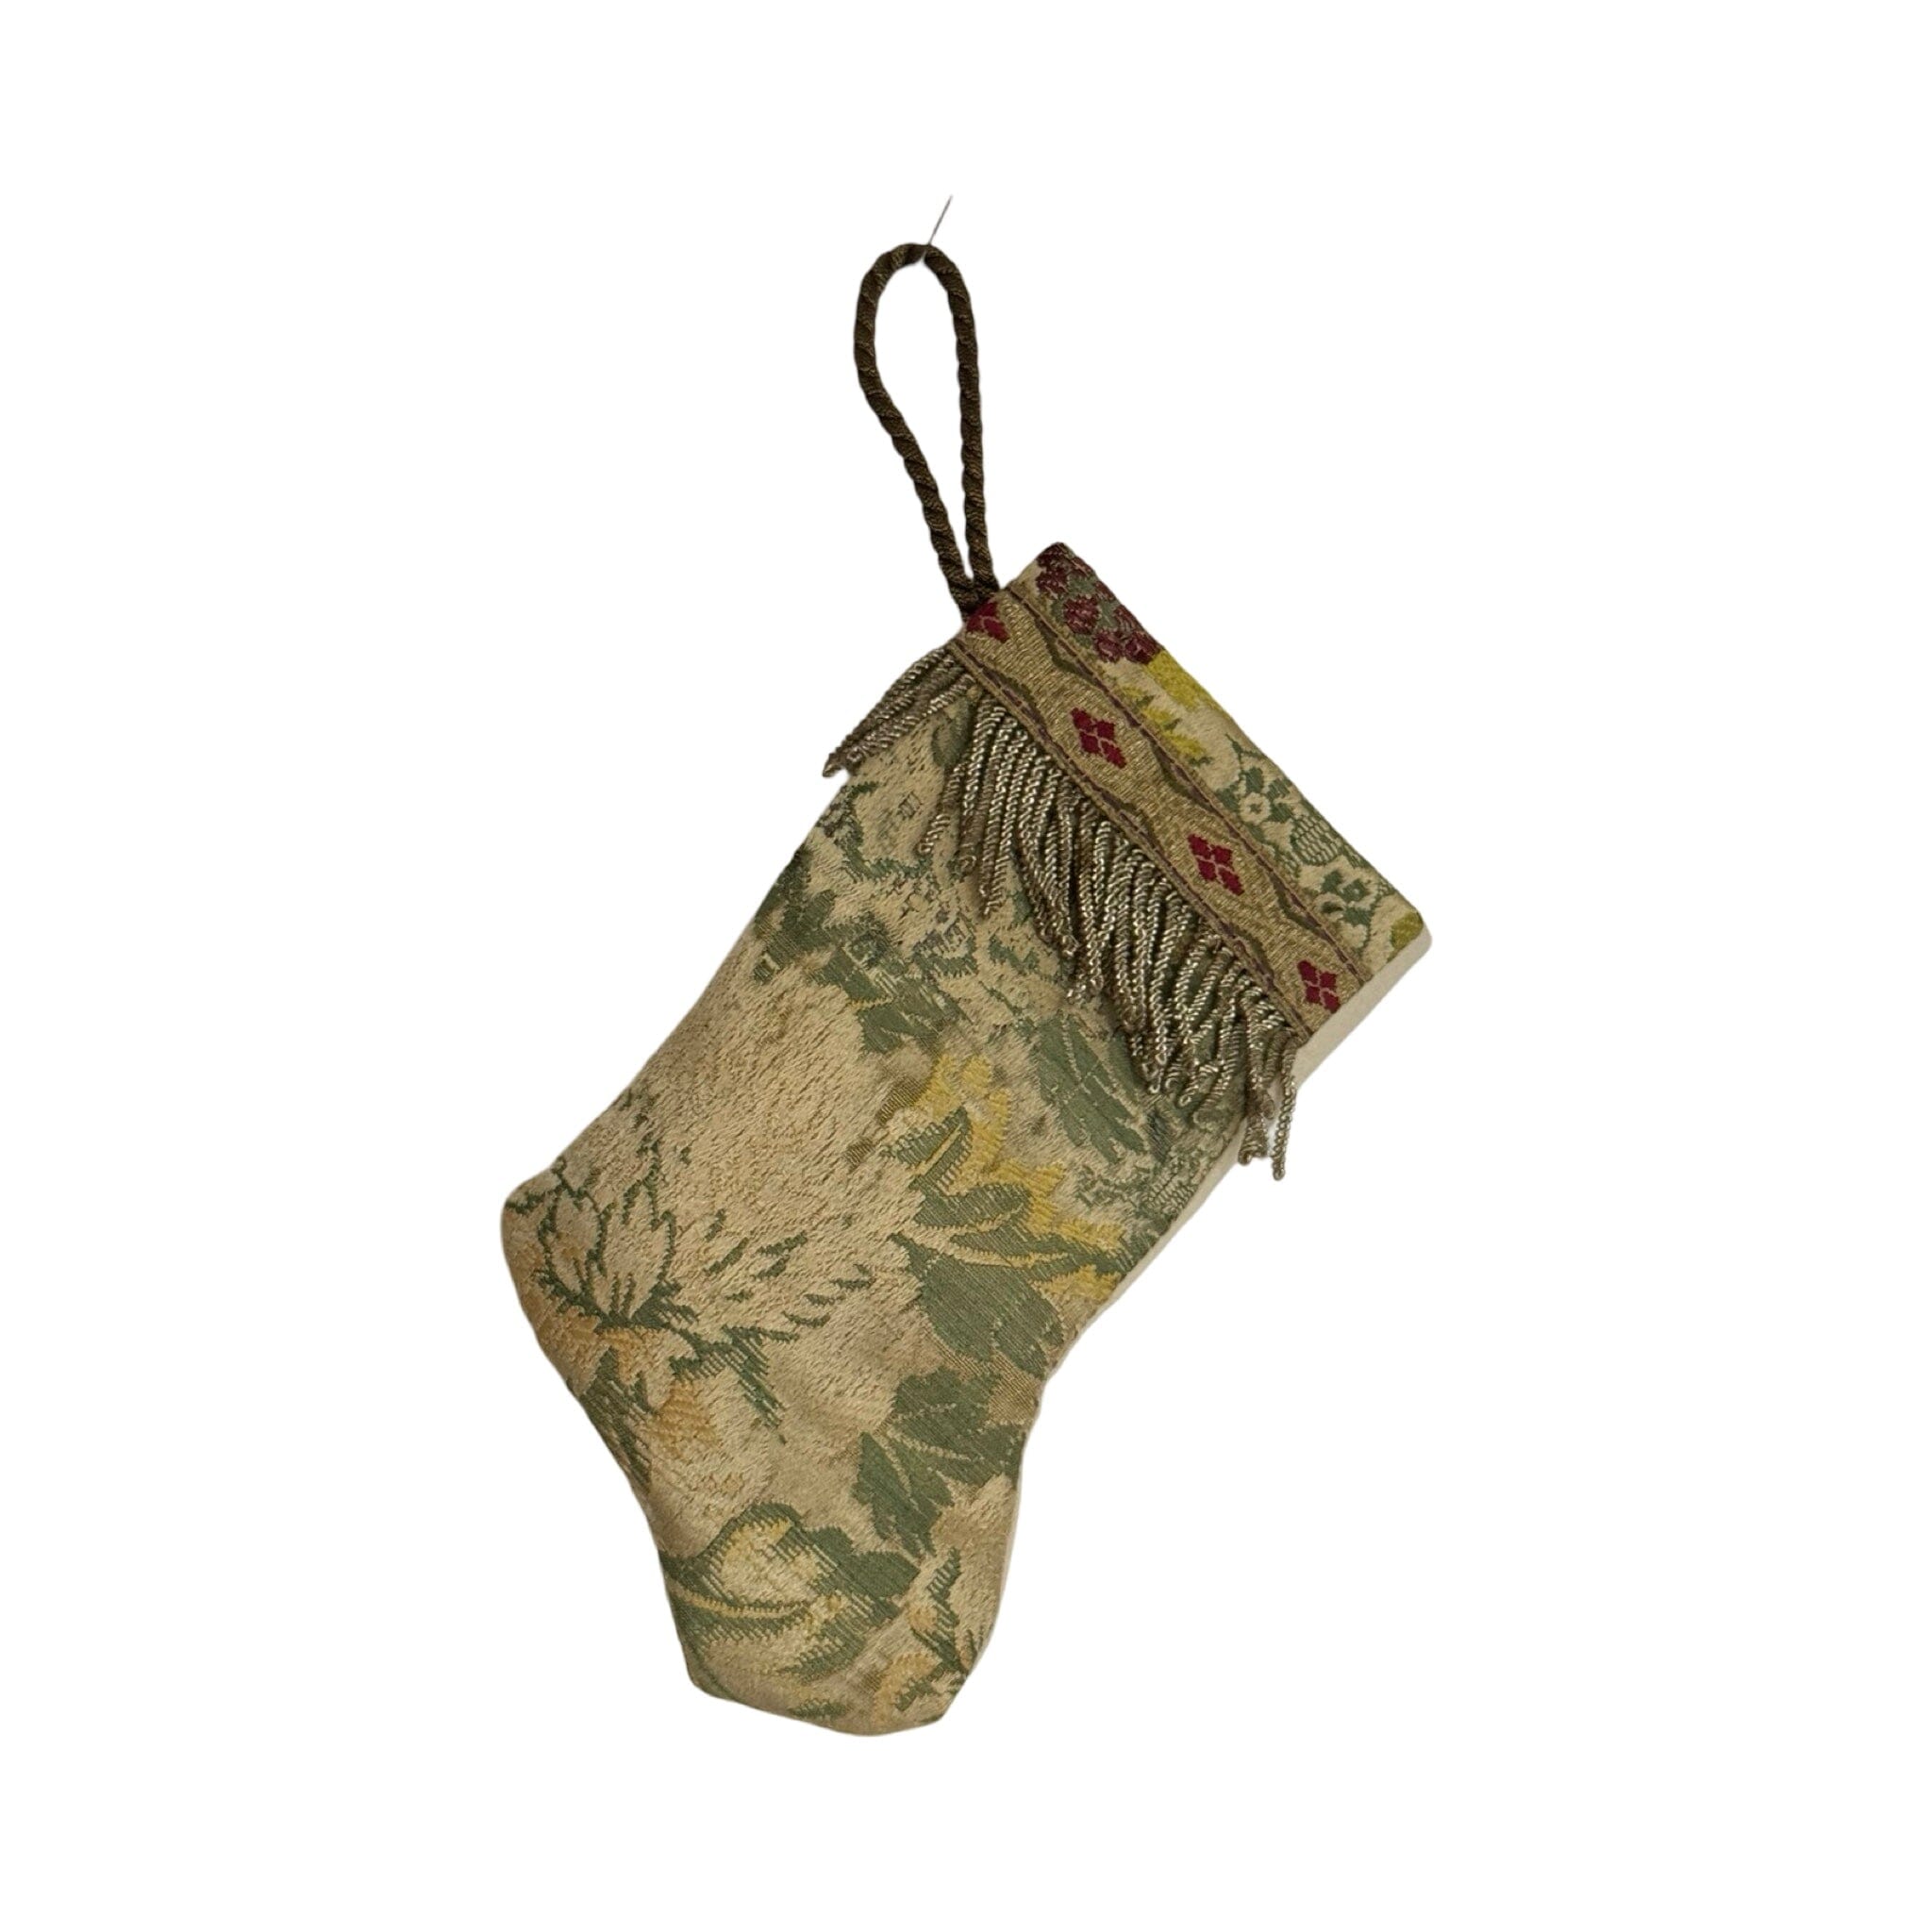 Handmade Mini Stocking Made From Vintage Fabric and Trims- Green and Gold Ornament B. Viz Design E 